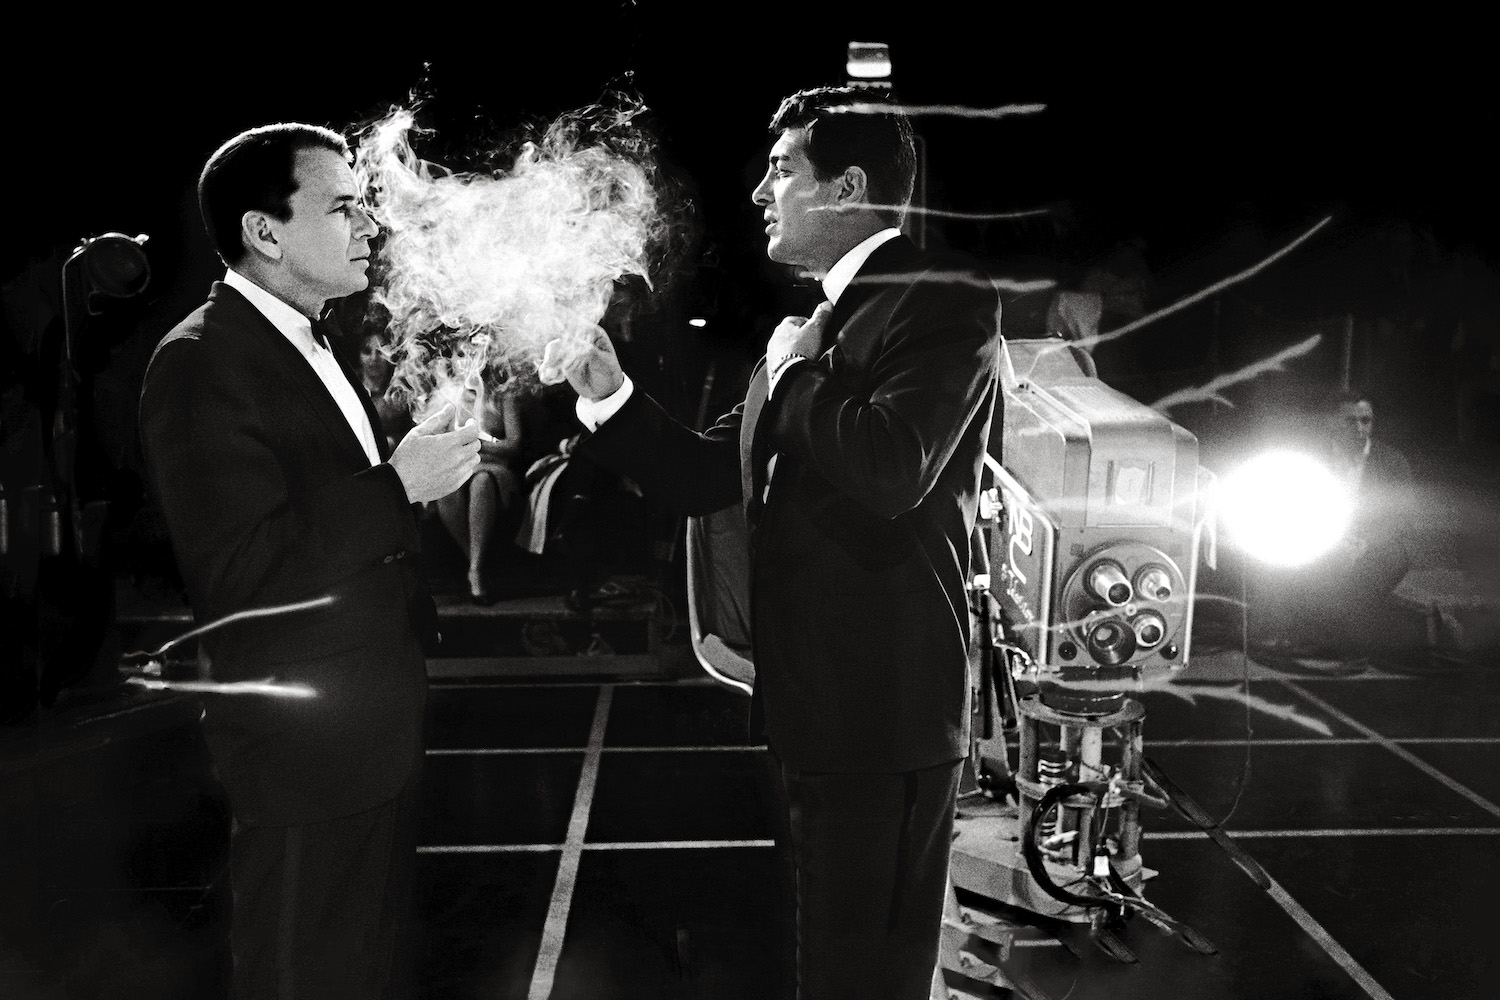 Frank Sinatra and Dean Martin smoking on set of the judy garland show